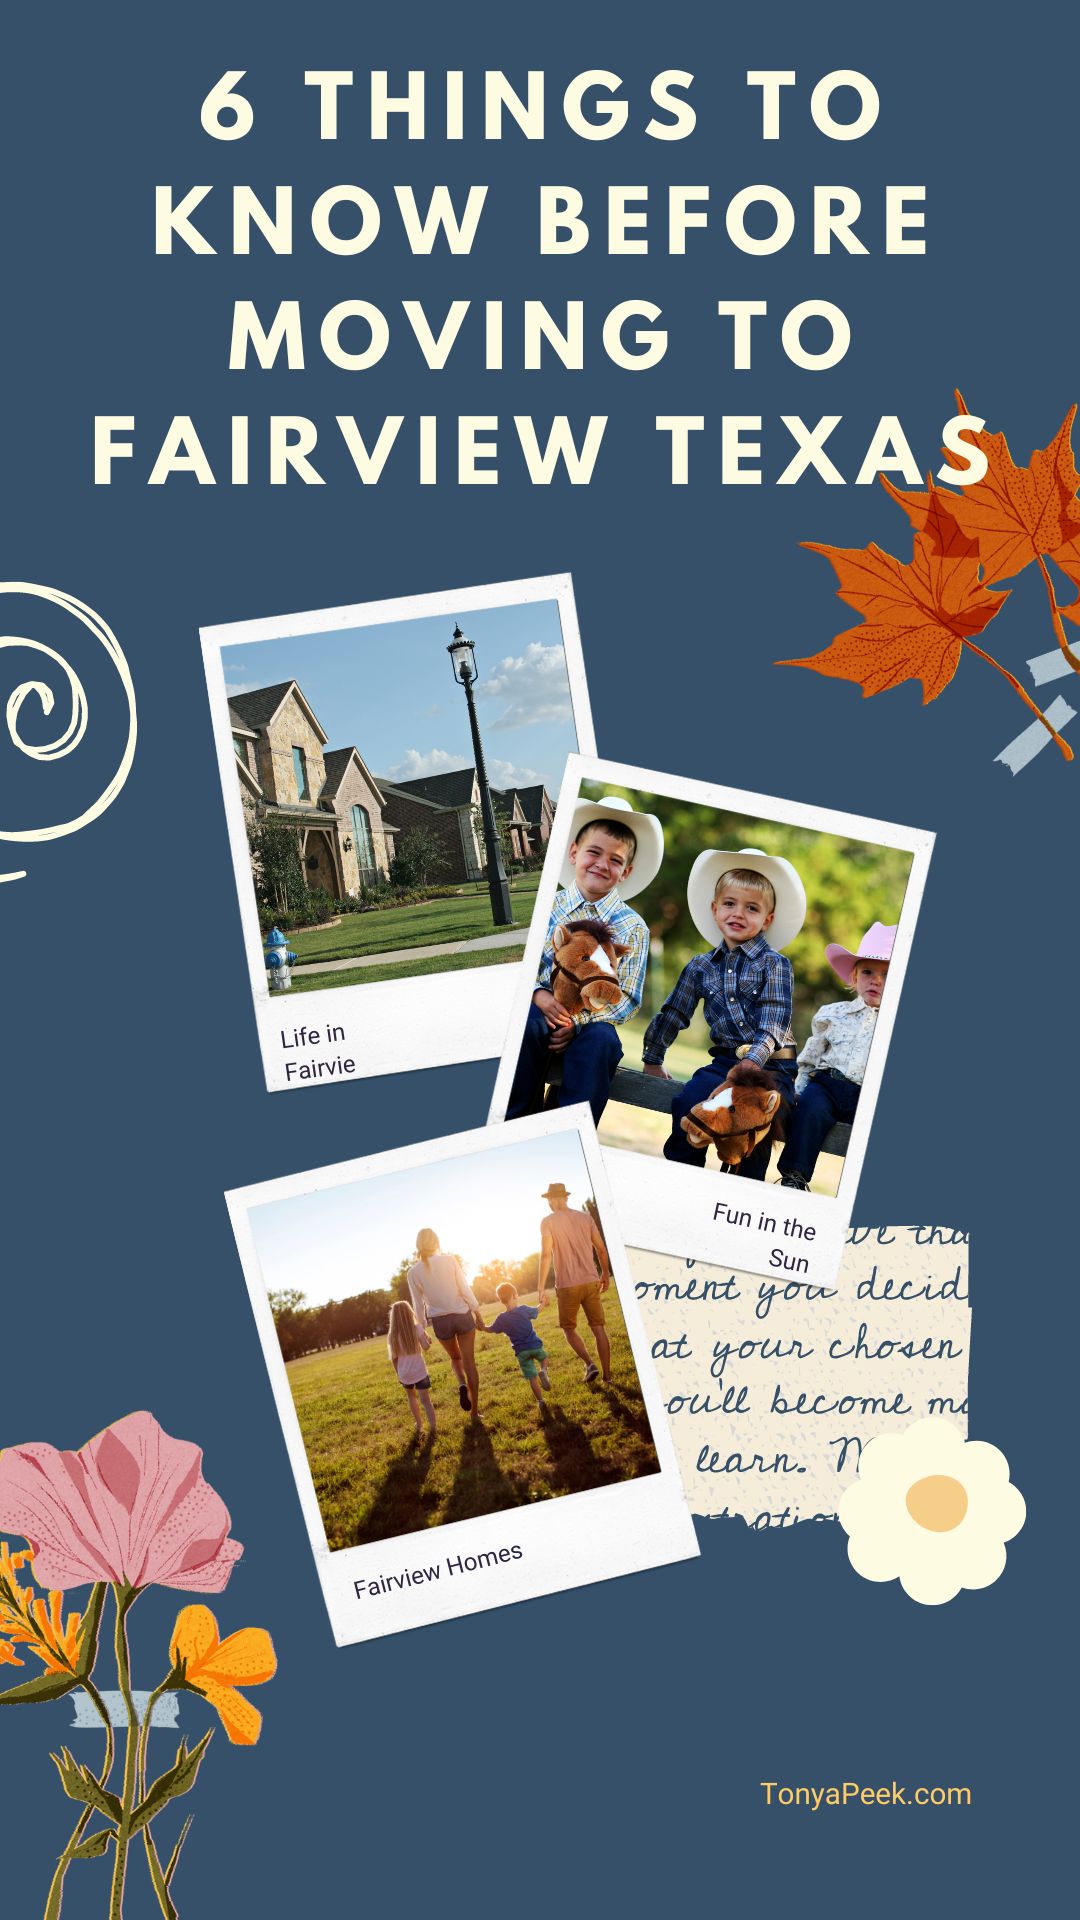 6 Things to know Before Moving to Fairview Texas